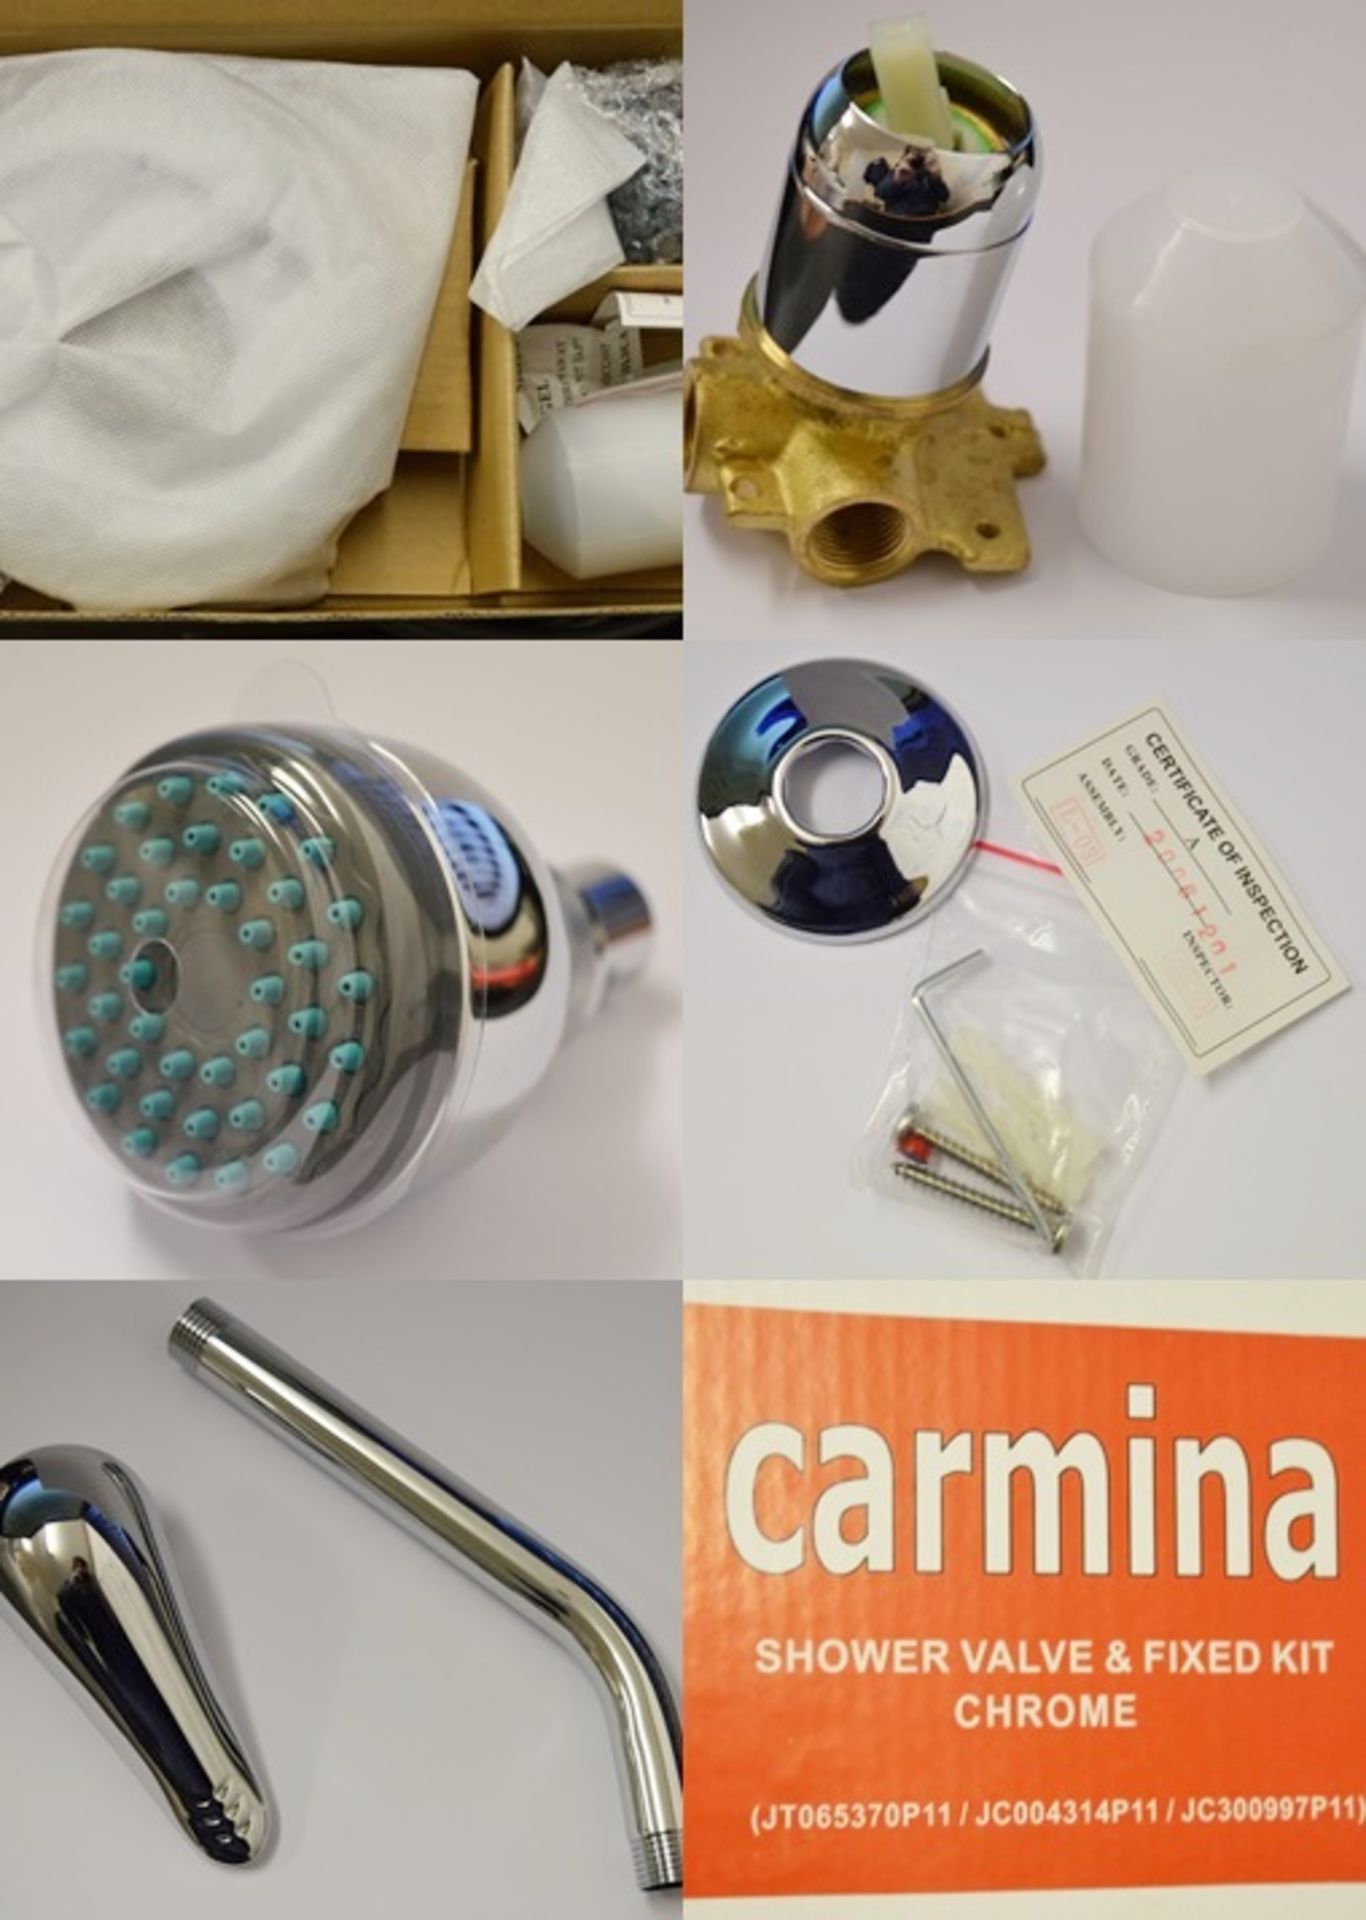 1 x Carmina Shower Valve Kit - Contains Chrome Shower Head, Fixed Arm and Manual Control - Brass - Image 4 of 11